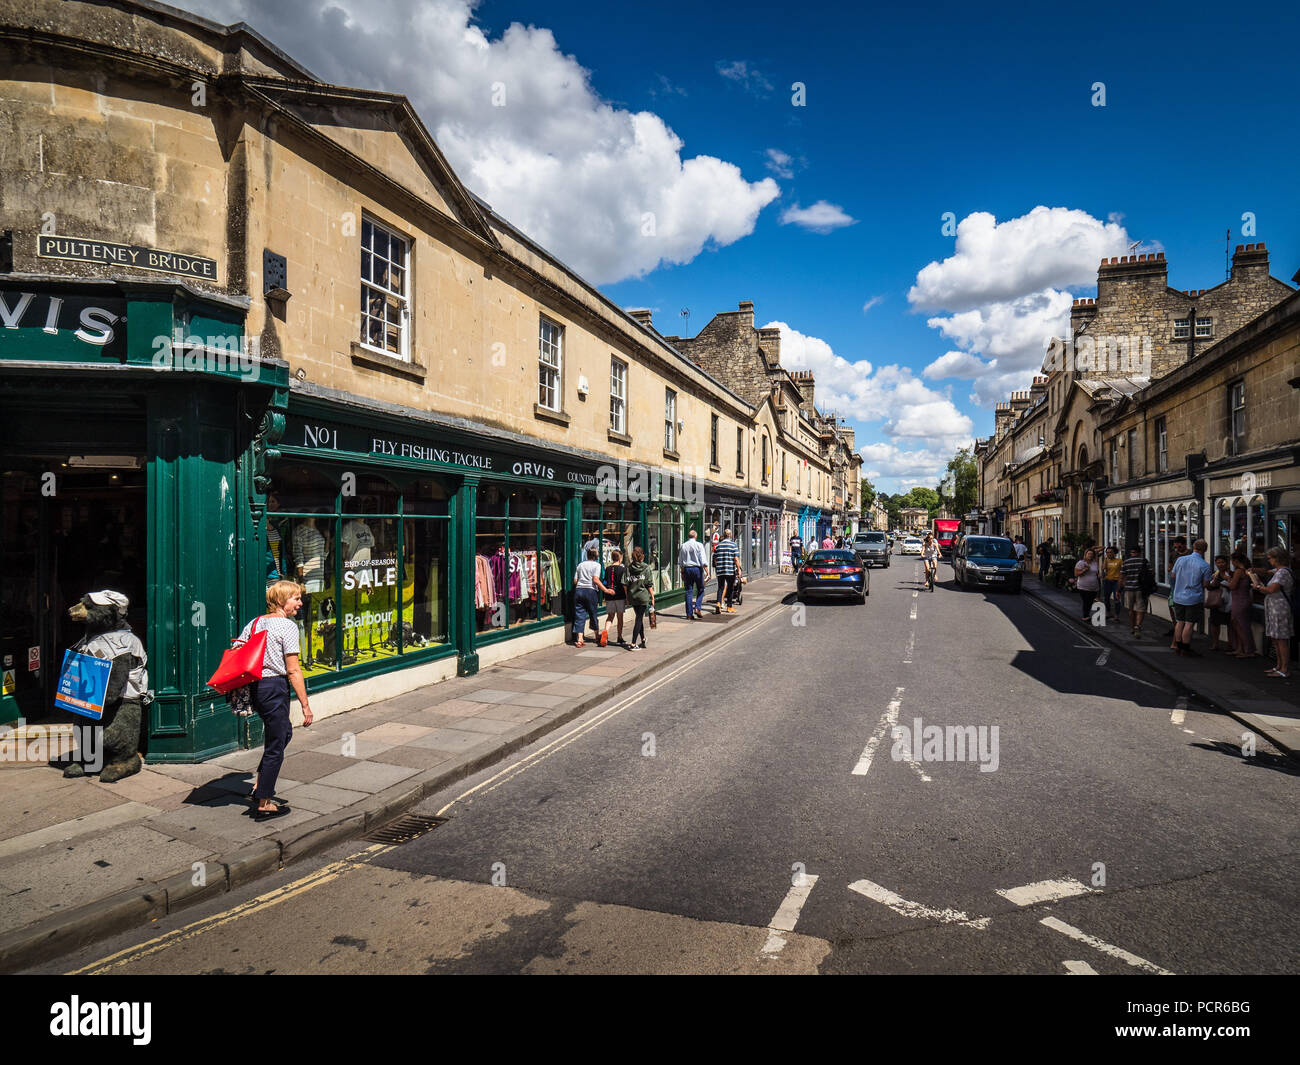 Bath Tourism - Pulteney Bridge in the historic centre of Bath, Somerset, UK.  The bridge was completed 1774, designed by Robert Adam - Palladian style  Stock Photo - Alamy